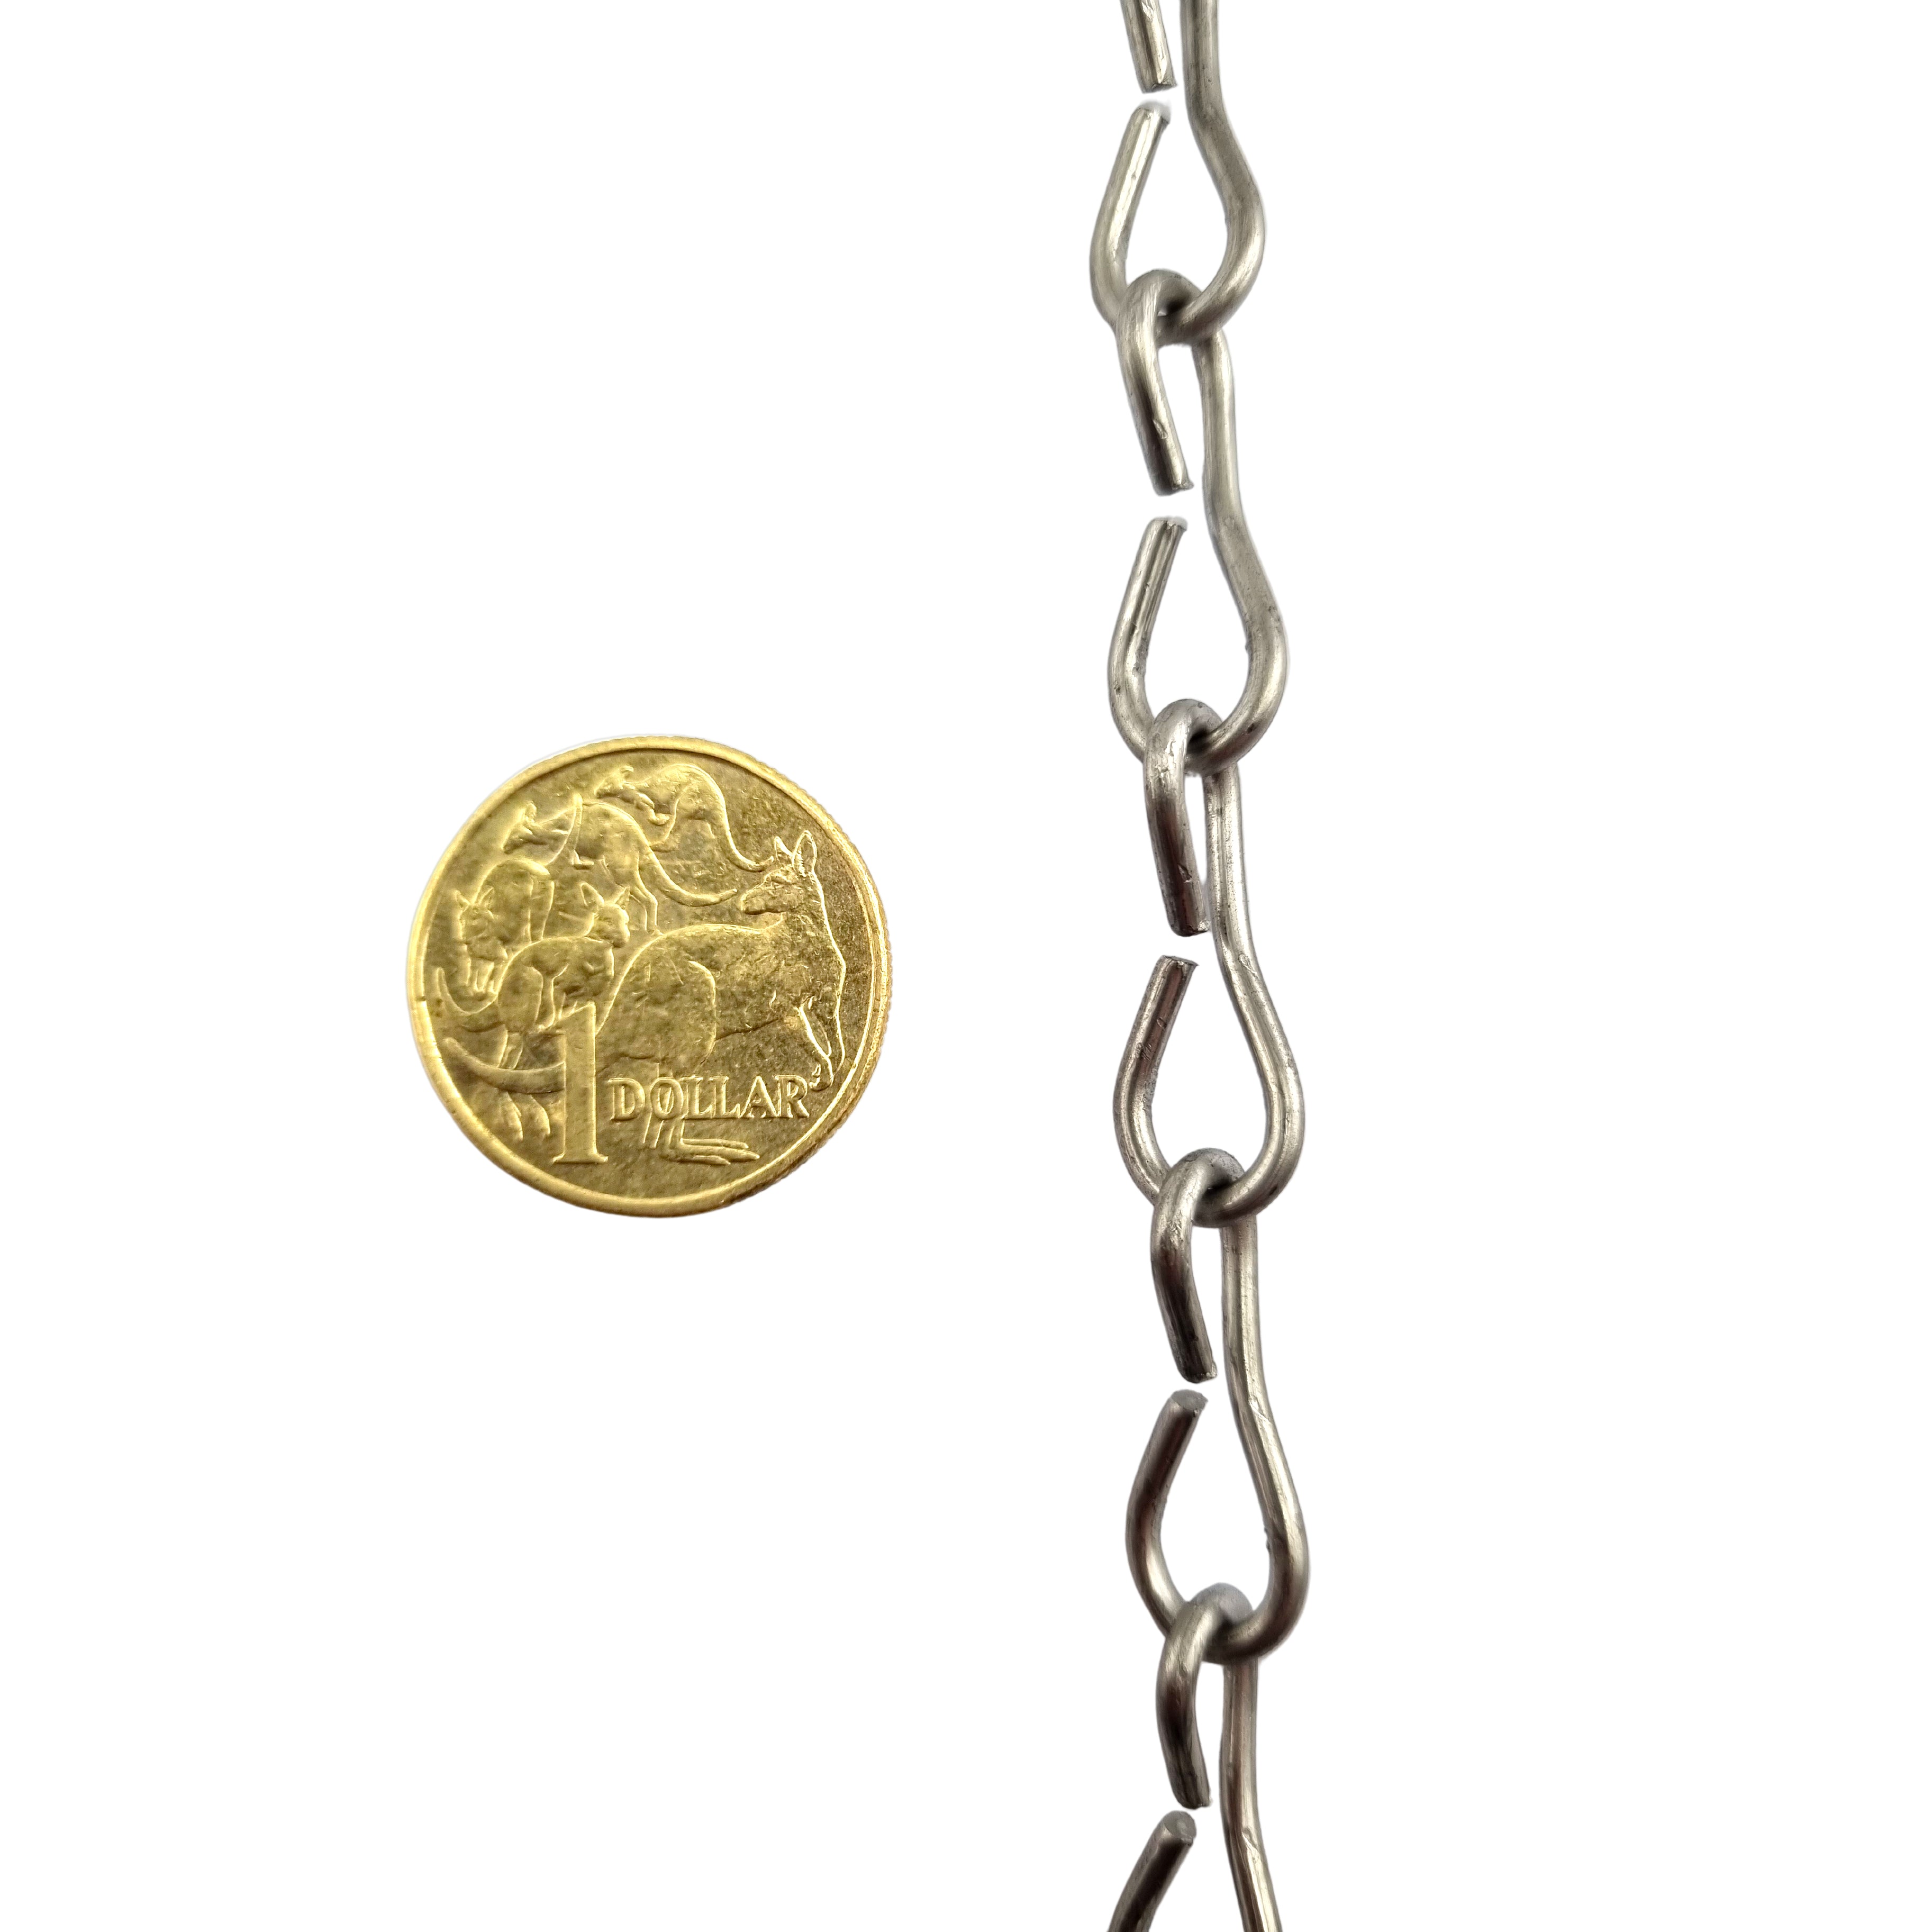 Single Jack Chain in Stainless Steel size 2mm x 30 metres. Melbourne, Australia